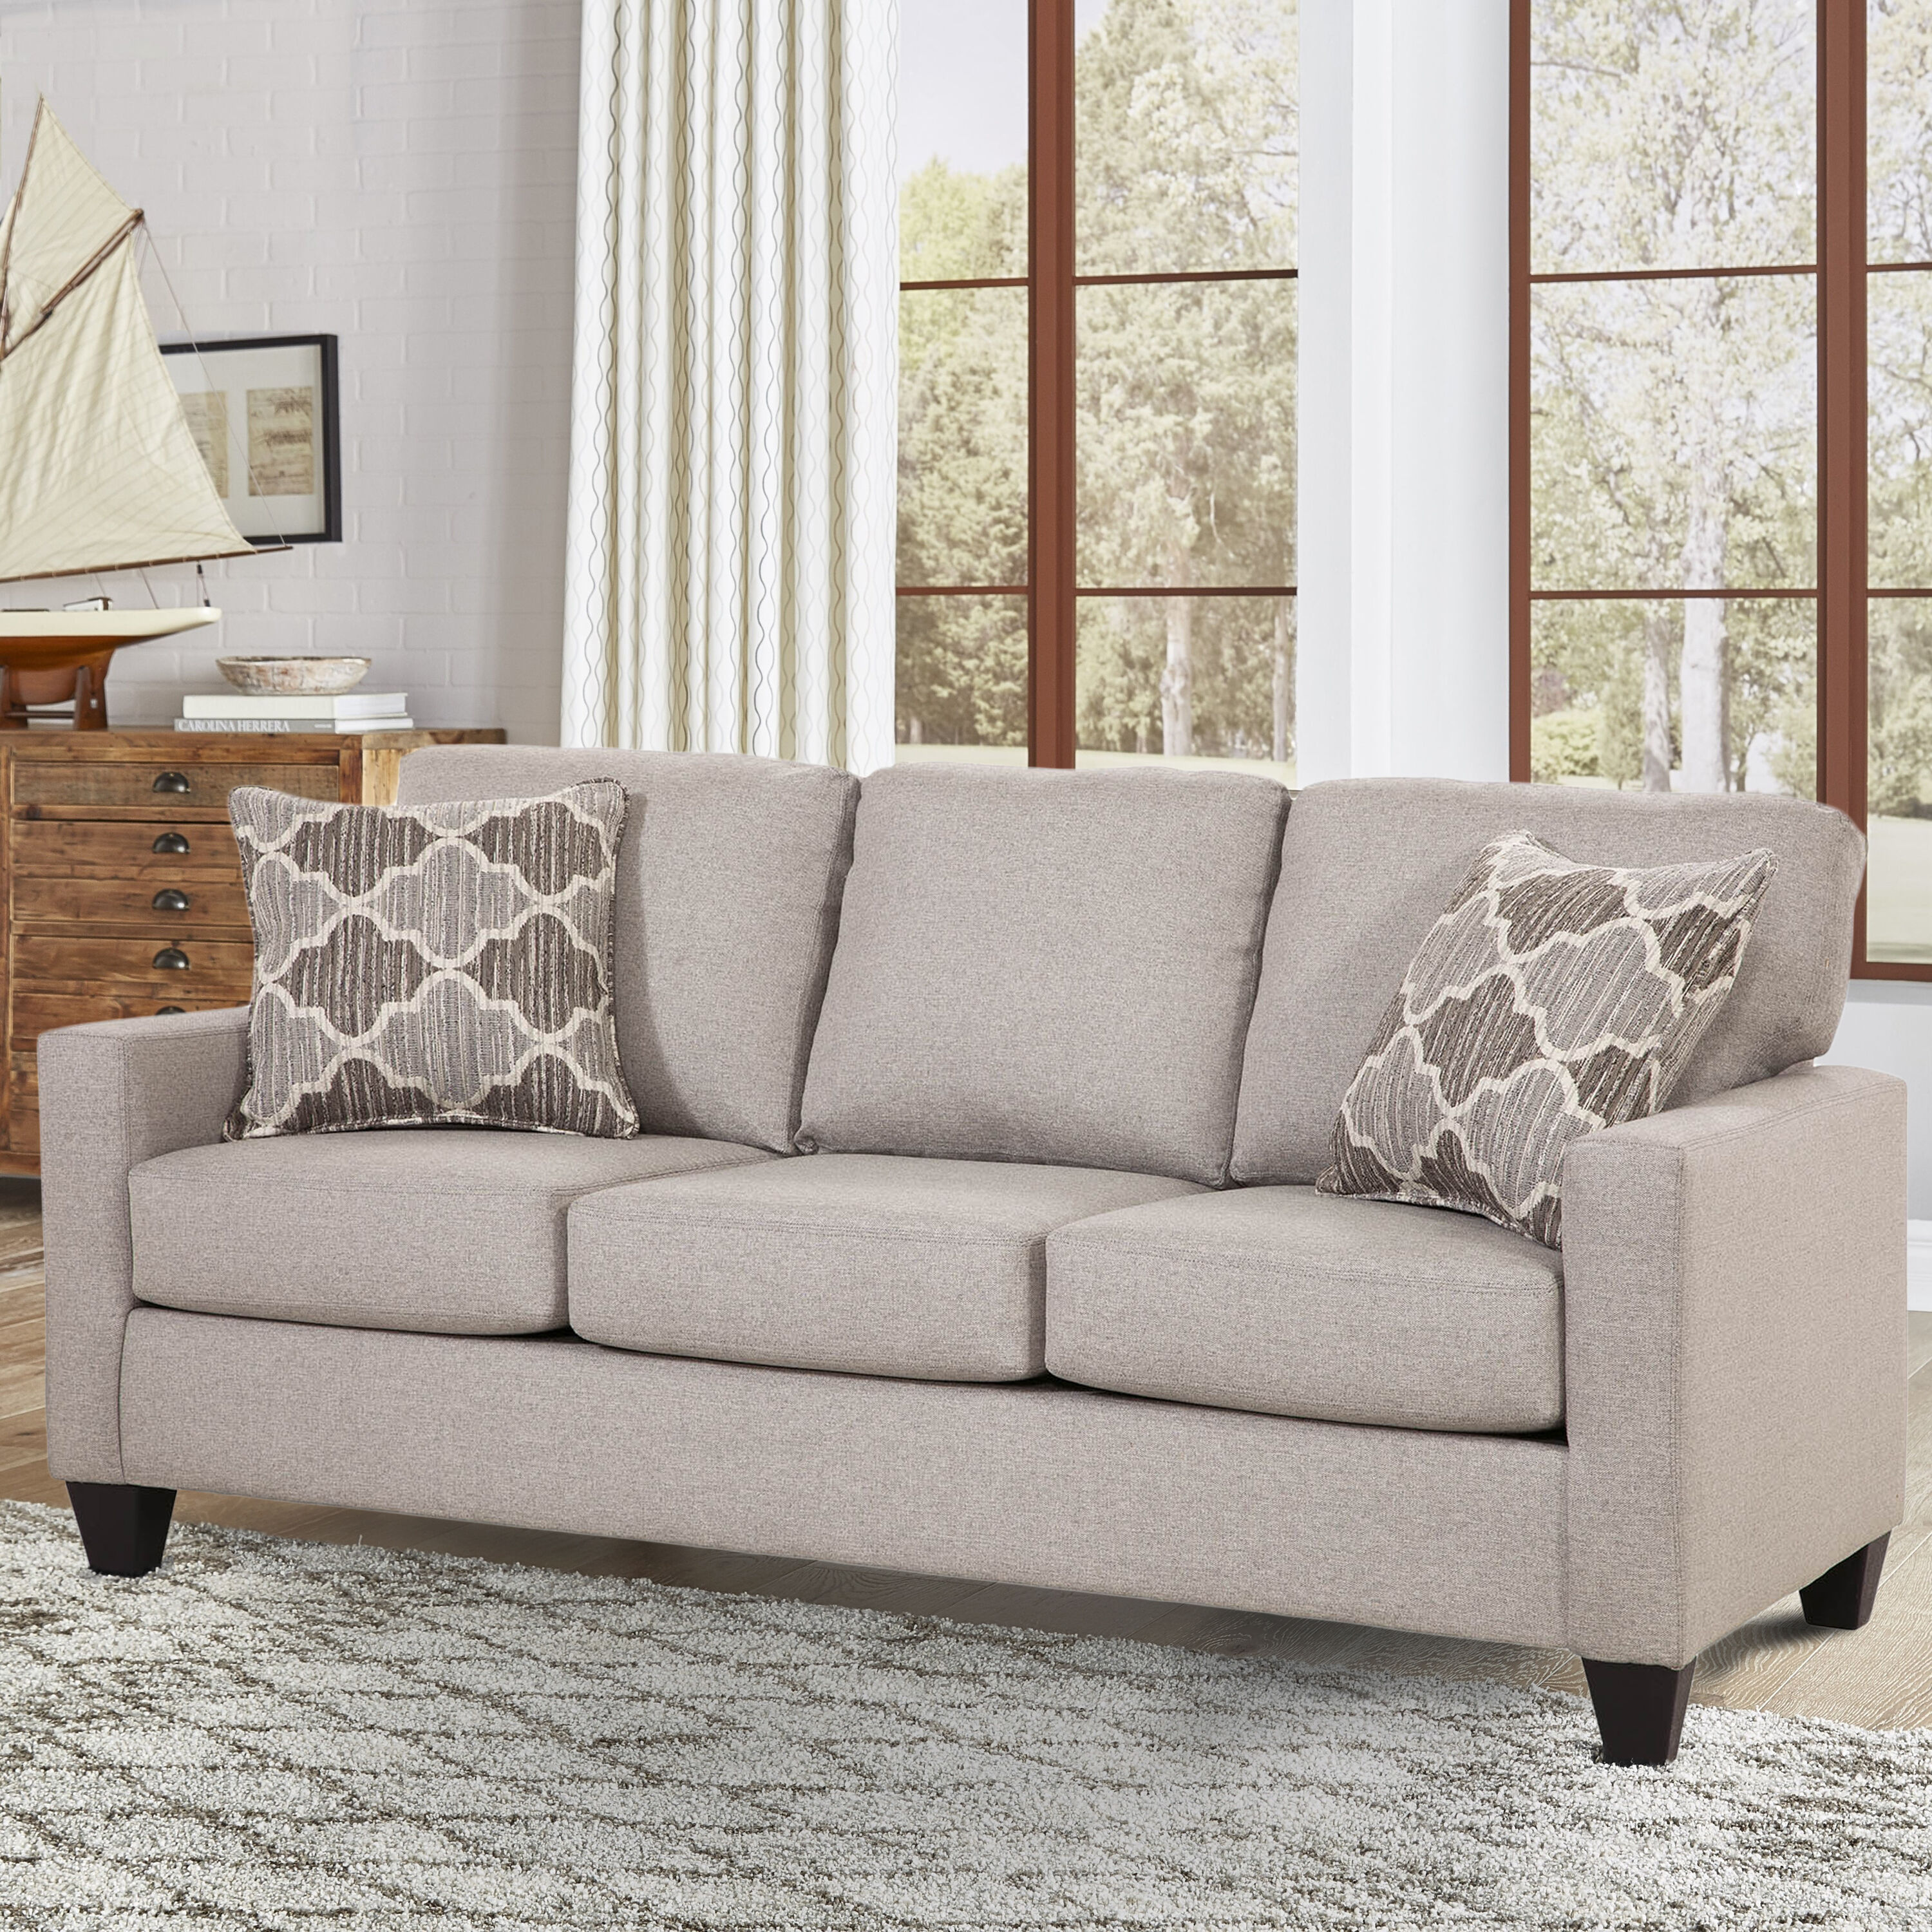 Moroccan Living Room Furniture at Lowes.com